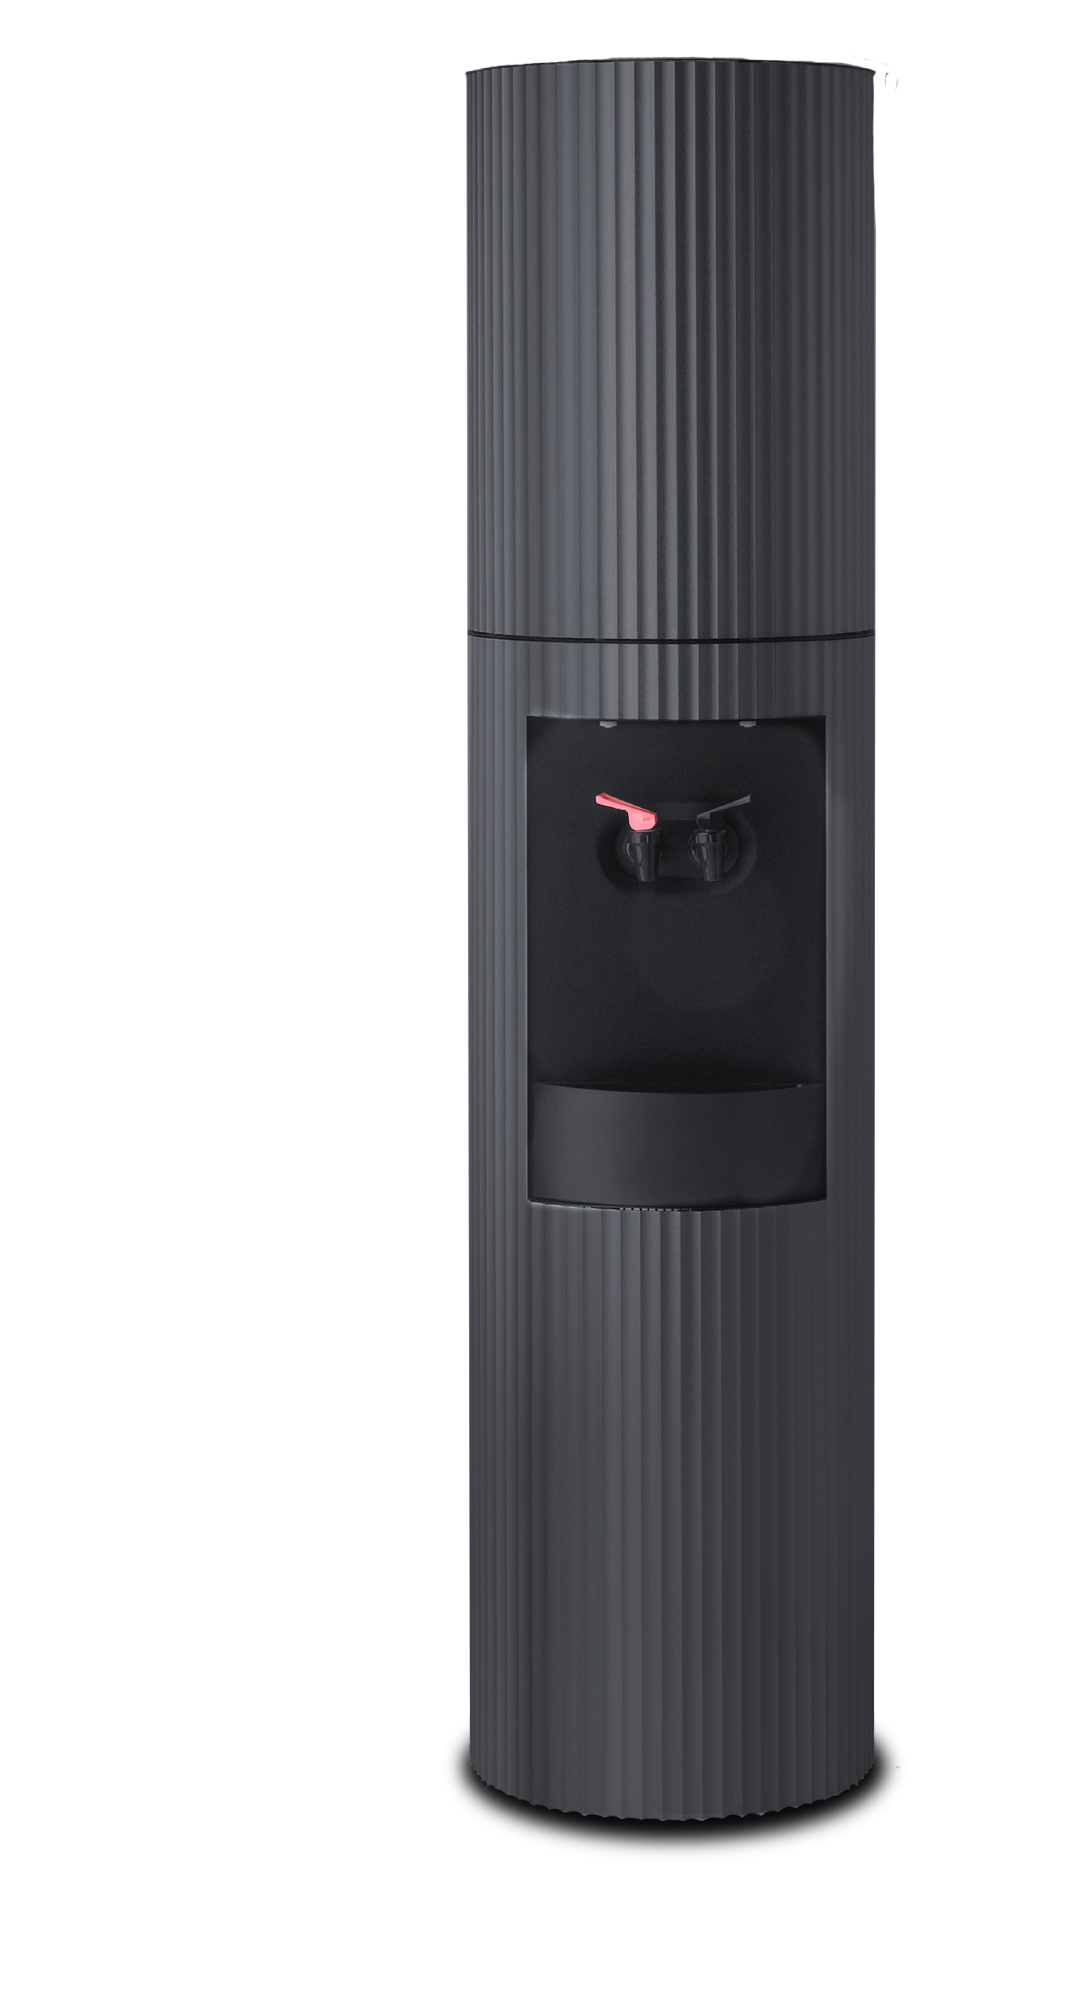 Celsius Bottleless Water Cooler in Fluted Aluminum with Powder Coated Black Finish - Hot & Cold